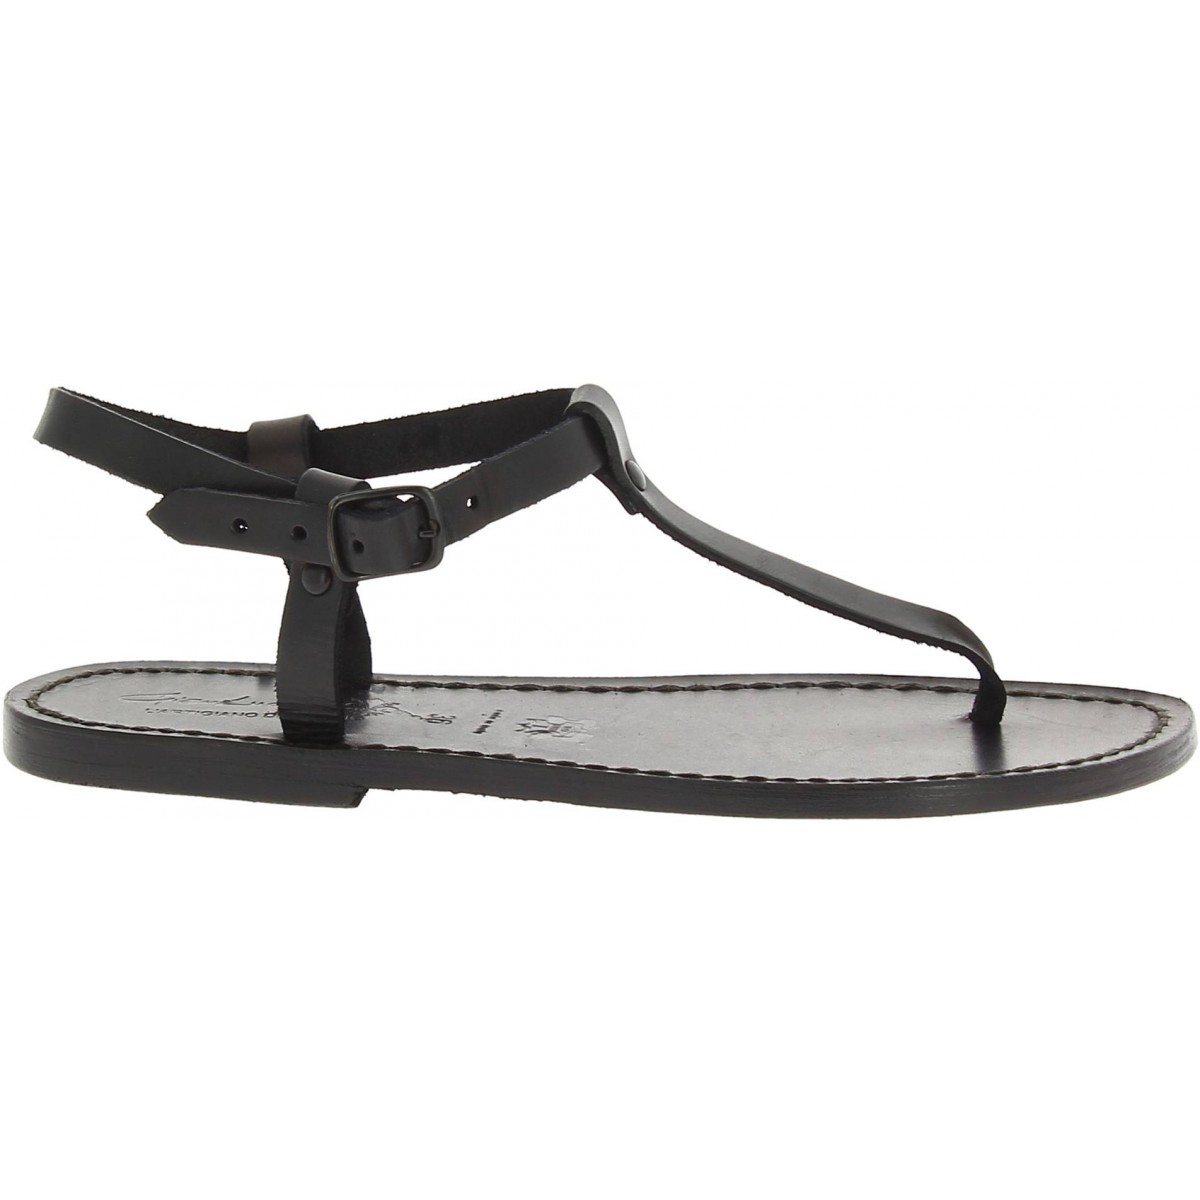 Thong sandals in black leather handmade in Italy | The leather craftsmen